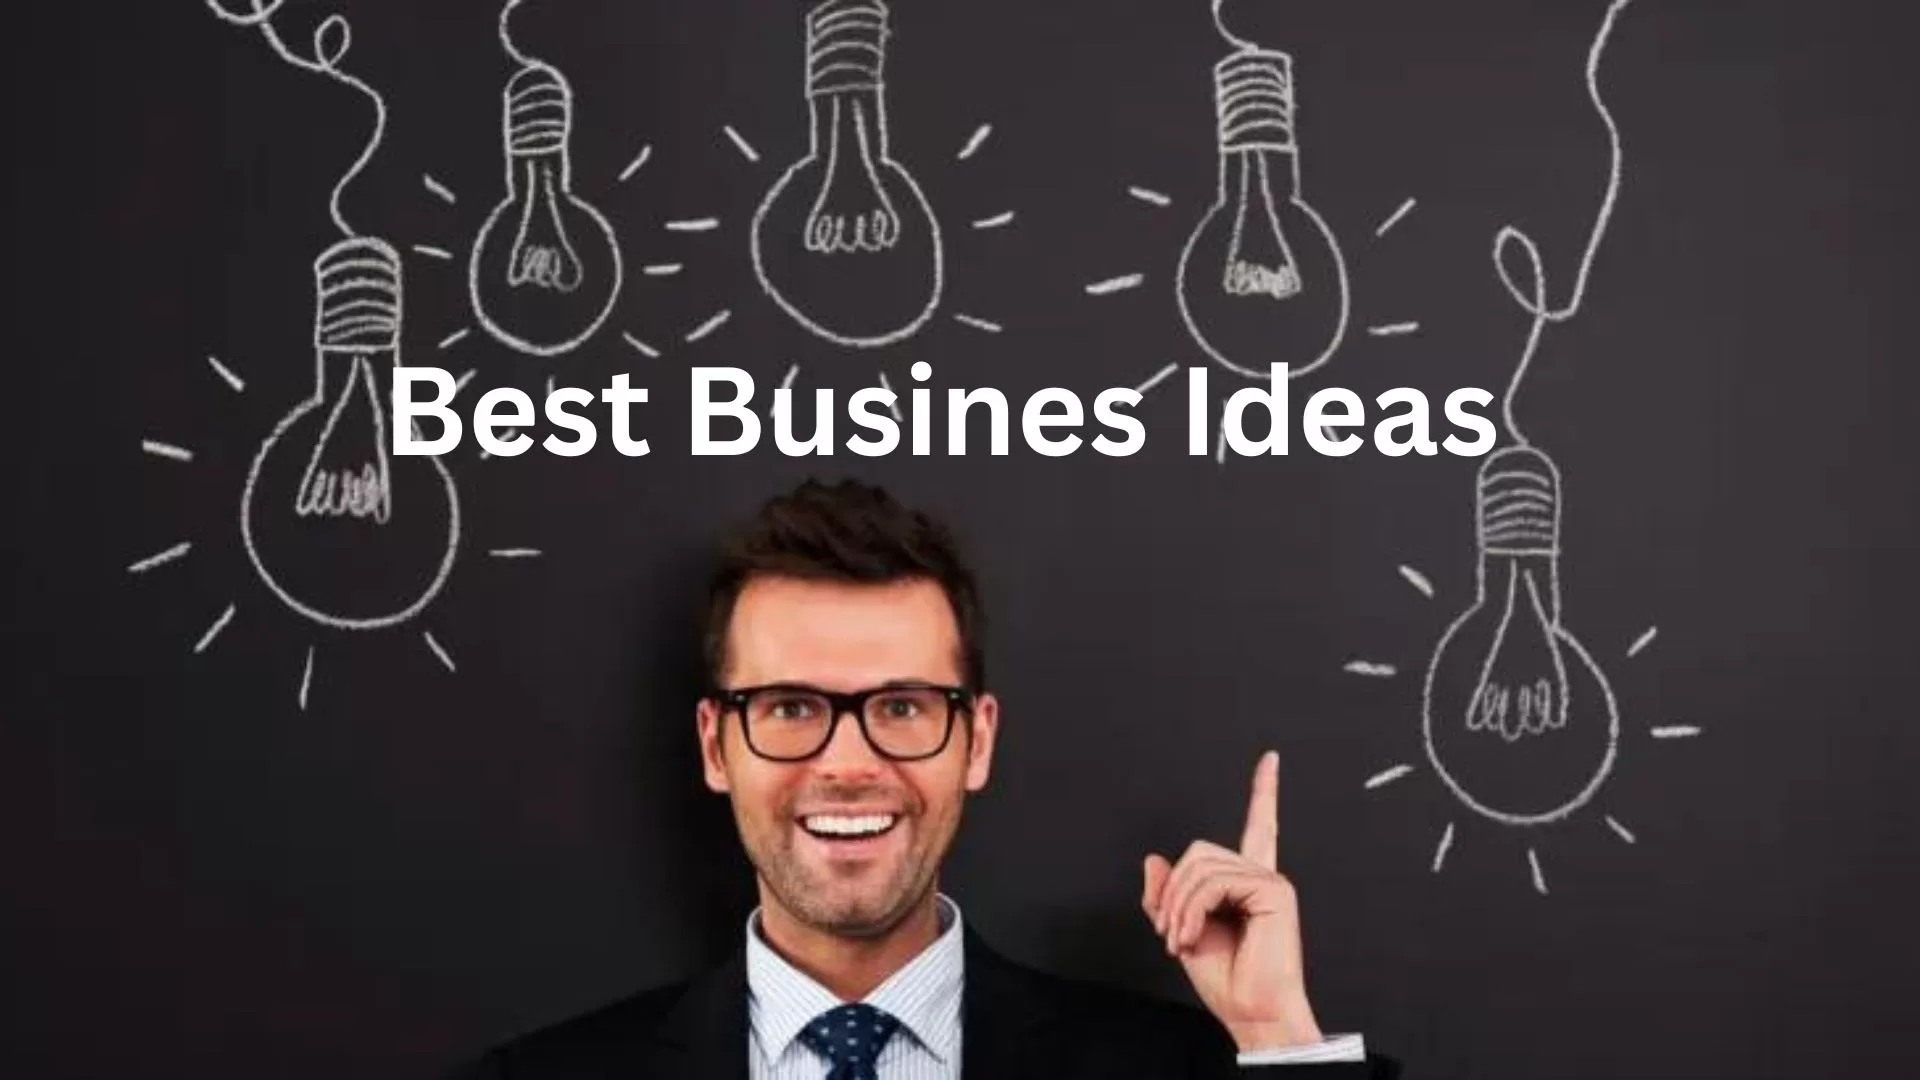 Best Business Ideas Doesn't Have To Be Hard. Read These 8 Tips | edtechreader